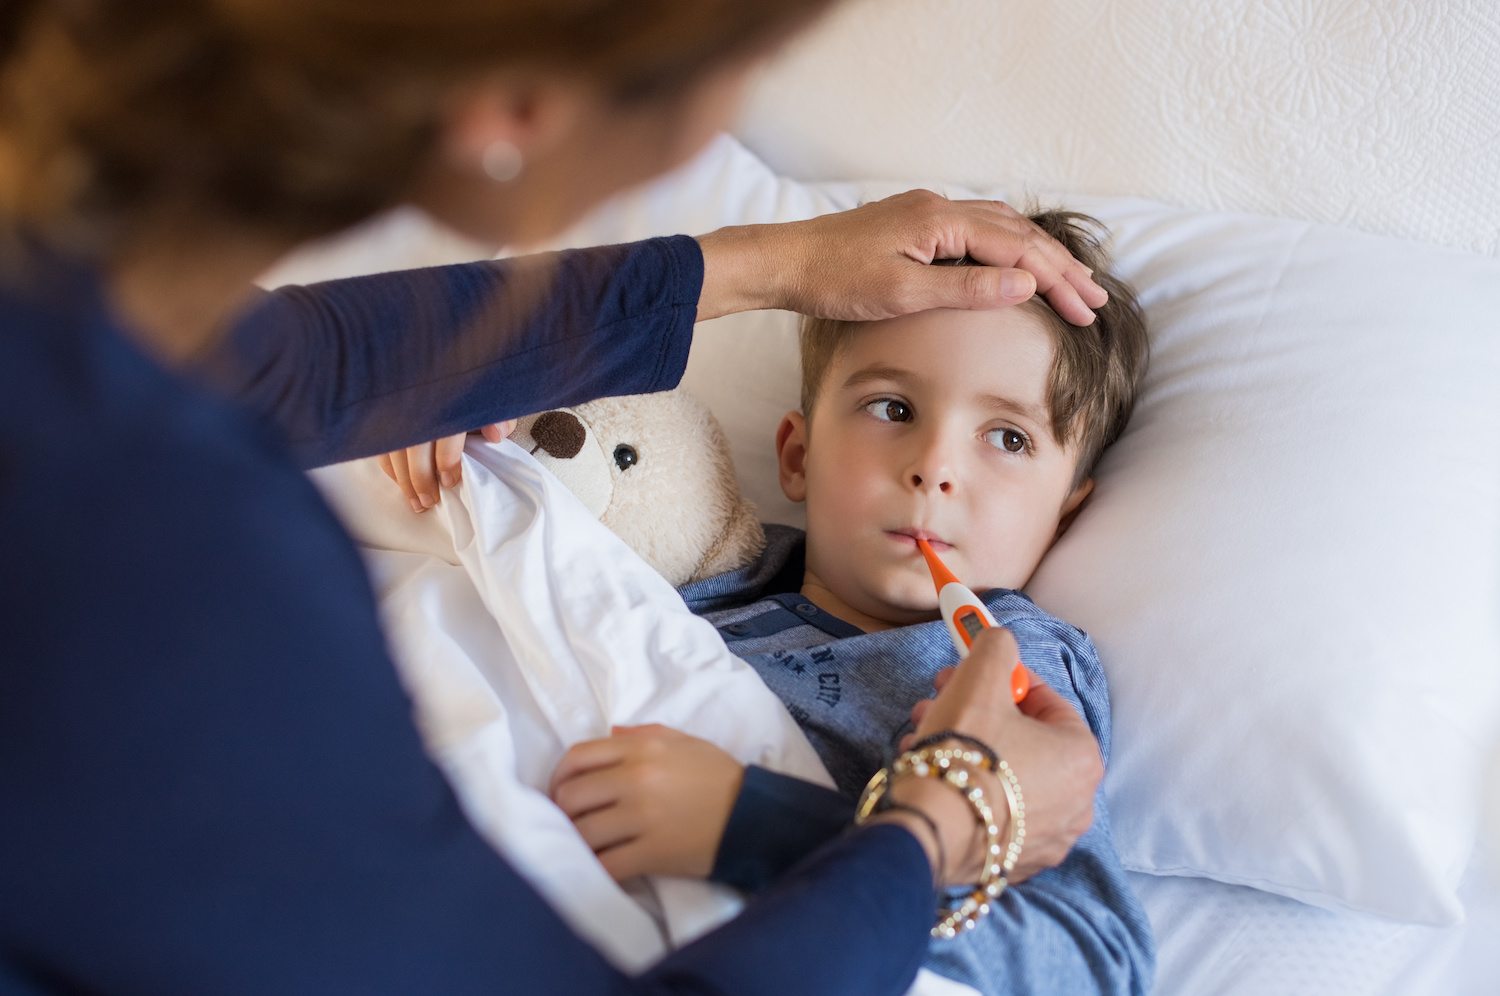 Boy with fever having temperature taken